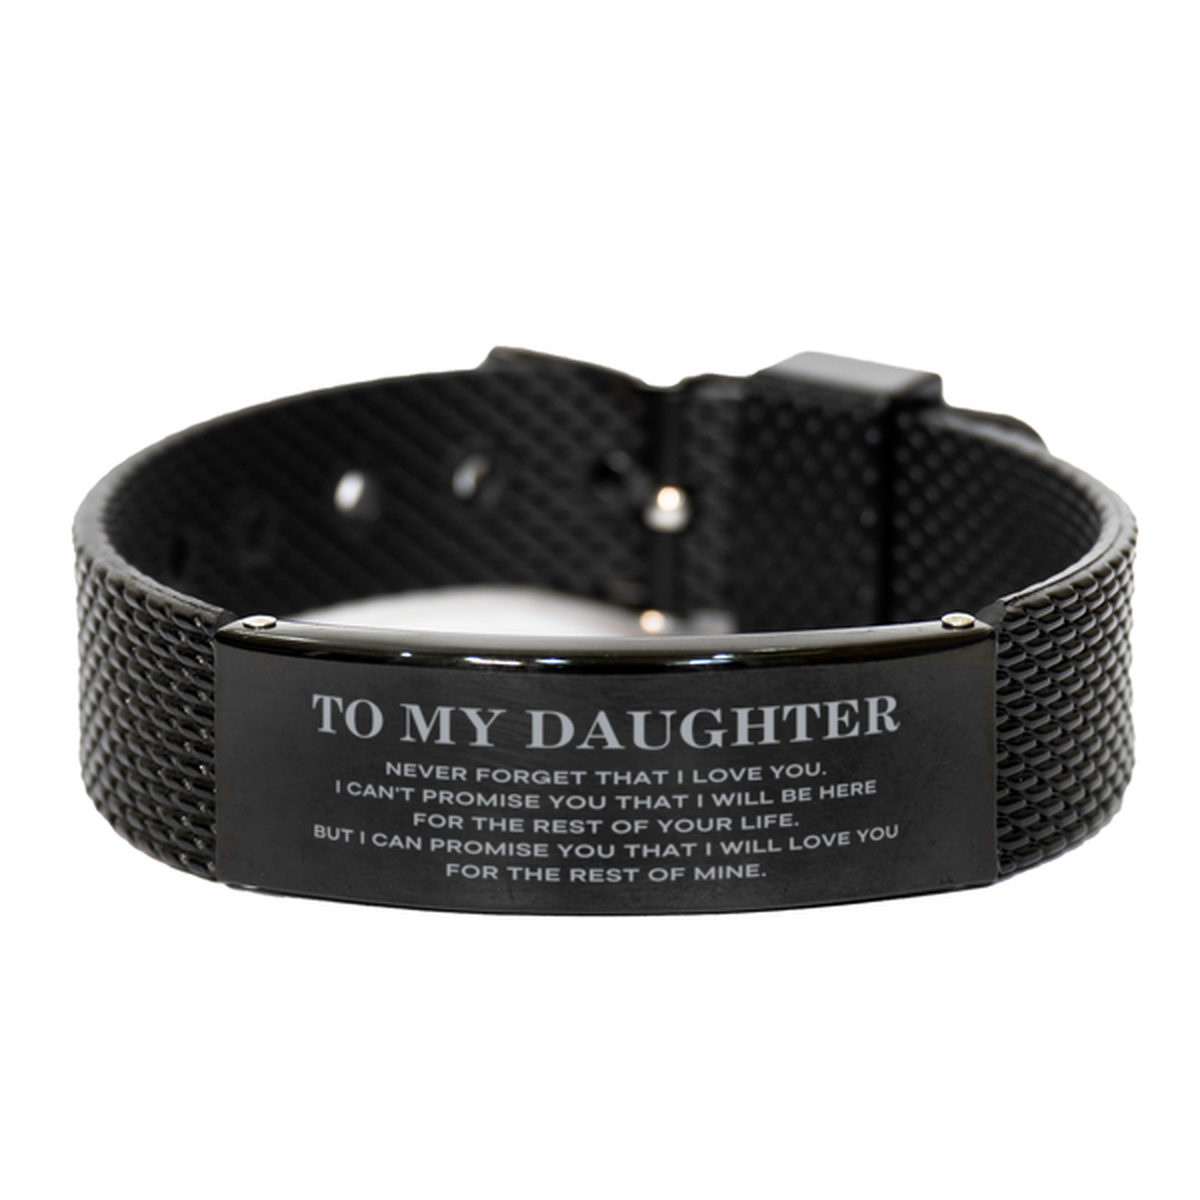 To My Daughter Gifts, I will love you for the rest of mine, Love Daughter Bracelet, Birthday Christmas Unique Black Shark Mesh Bracelet For Daughter